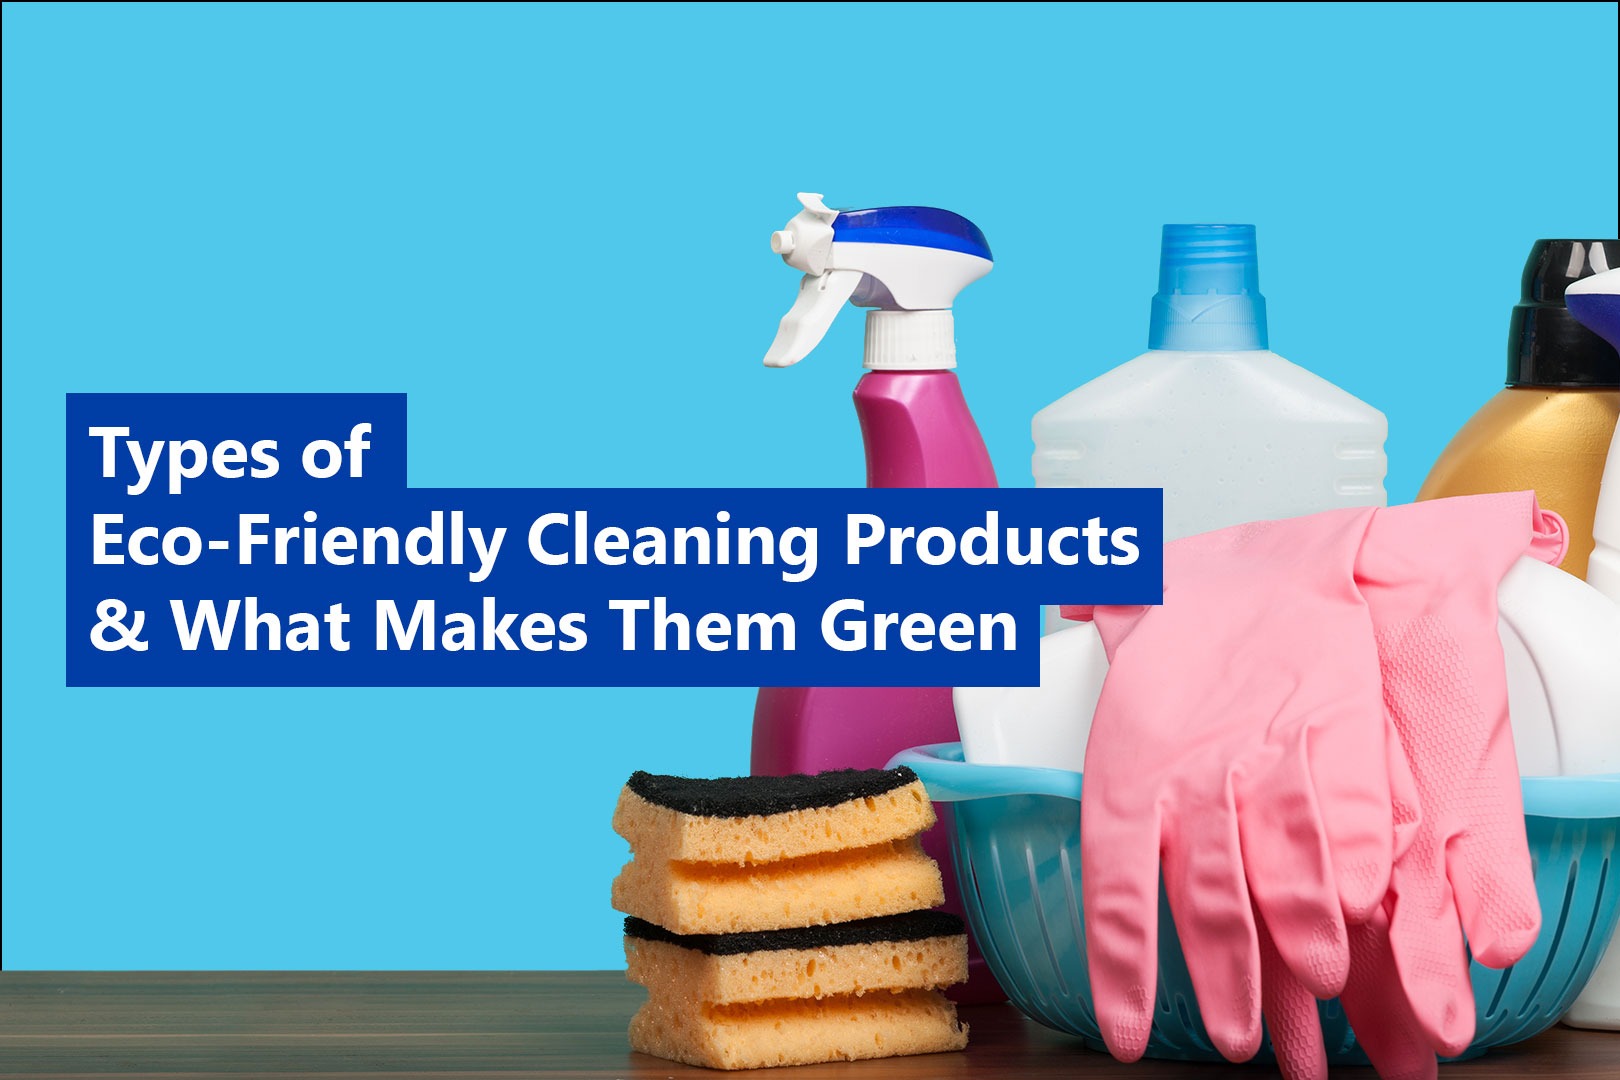 Types of Eco-Friendly Cleaning Products & What Makes Them Green